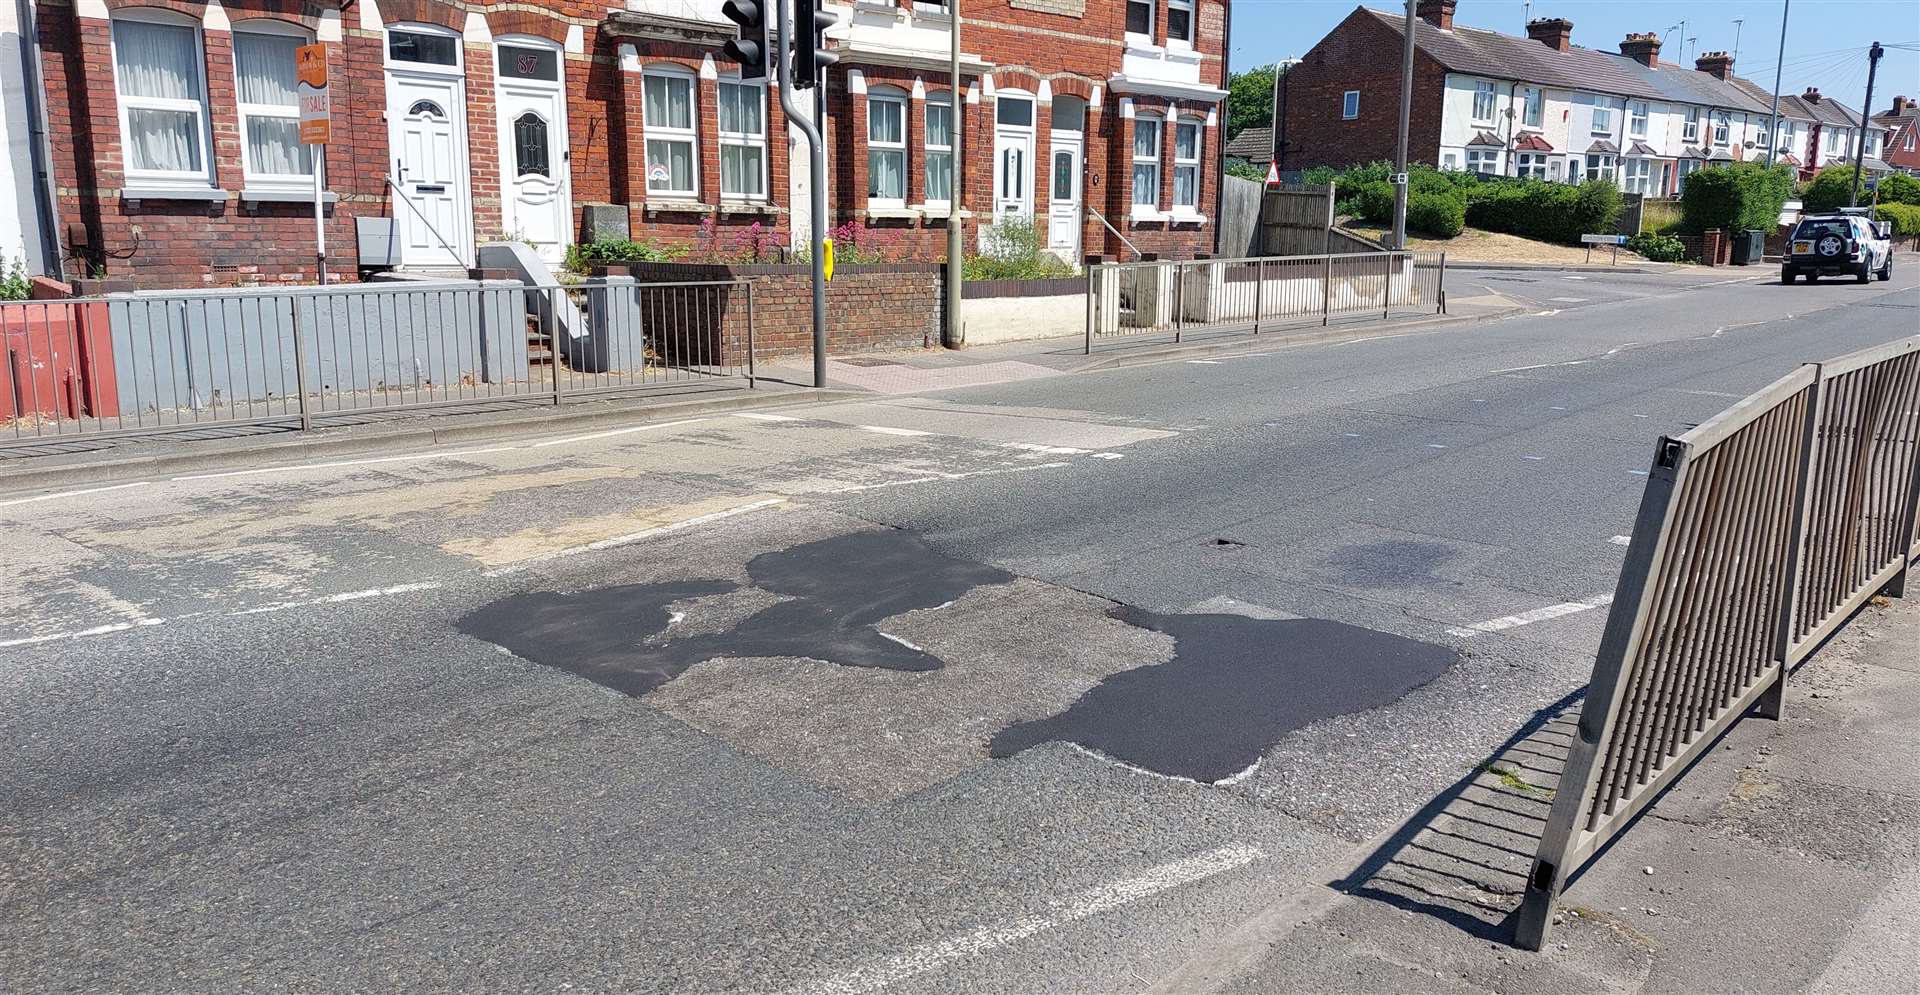 The problem is made worse by uneven road surfaces